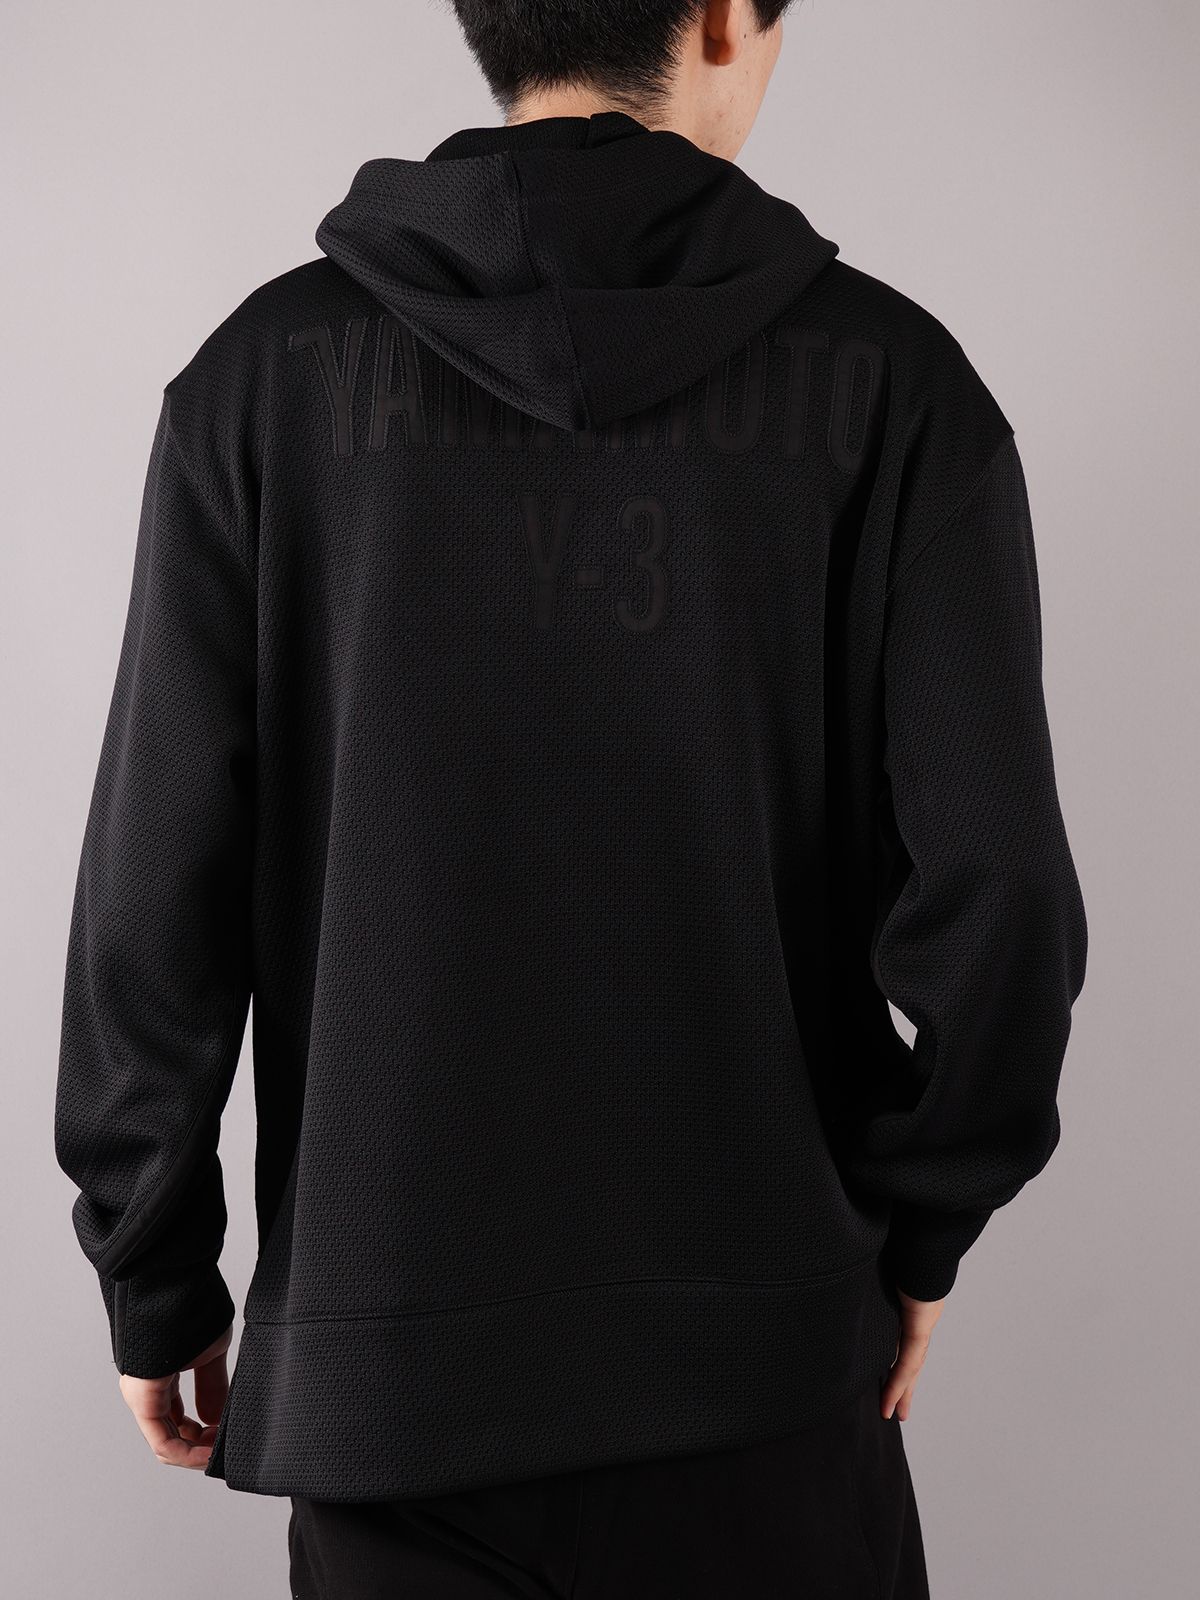 Y-3 - ワイスリー / 20aw / Chapter 2 | Confidence